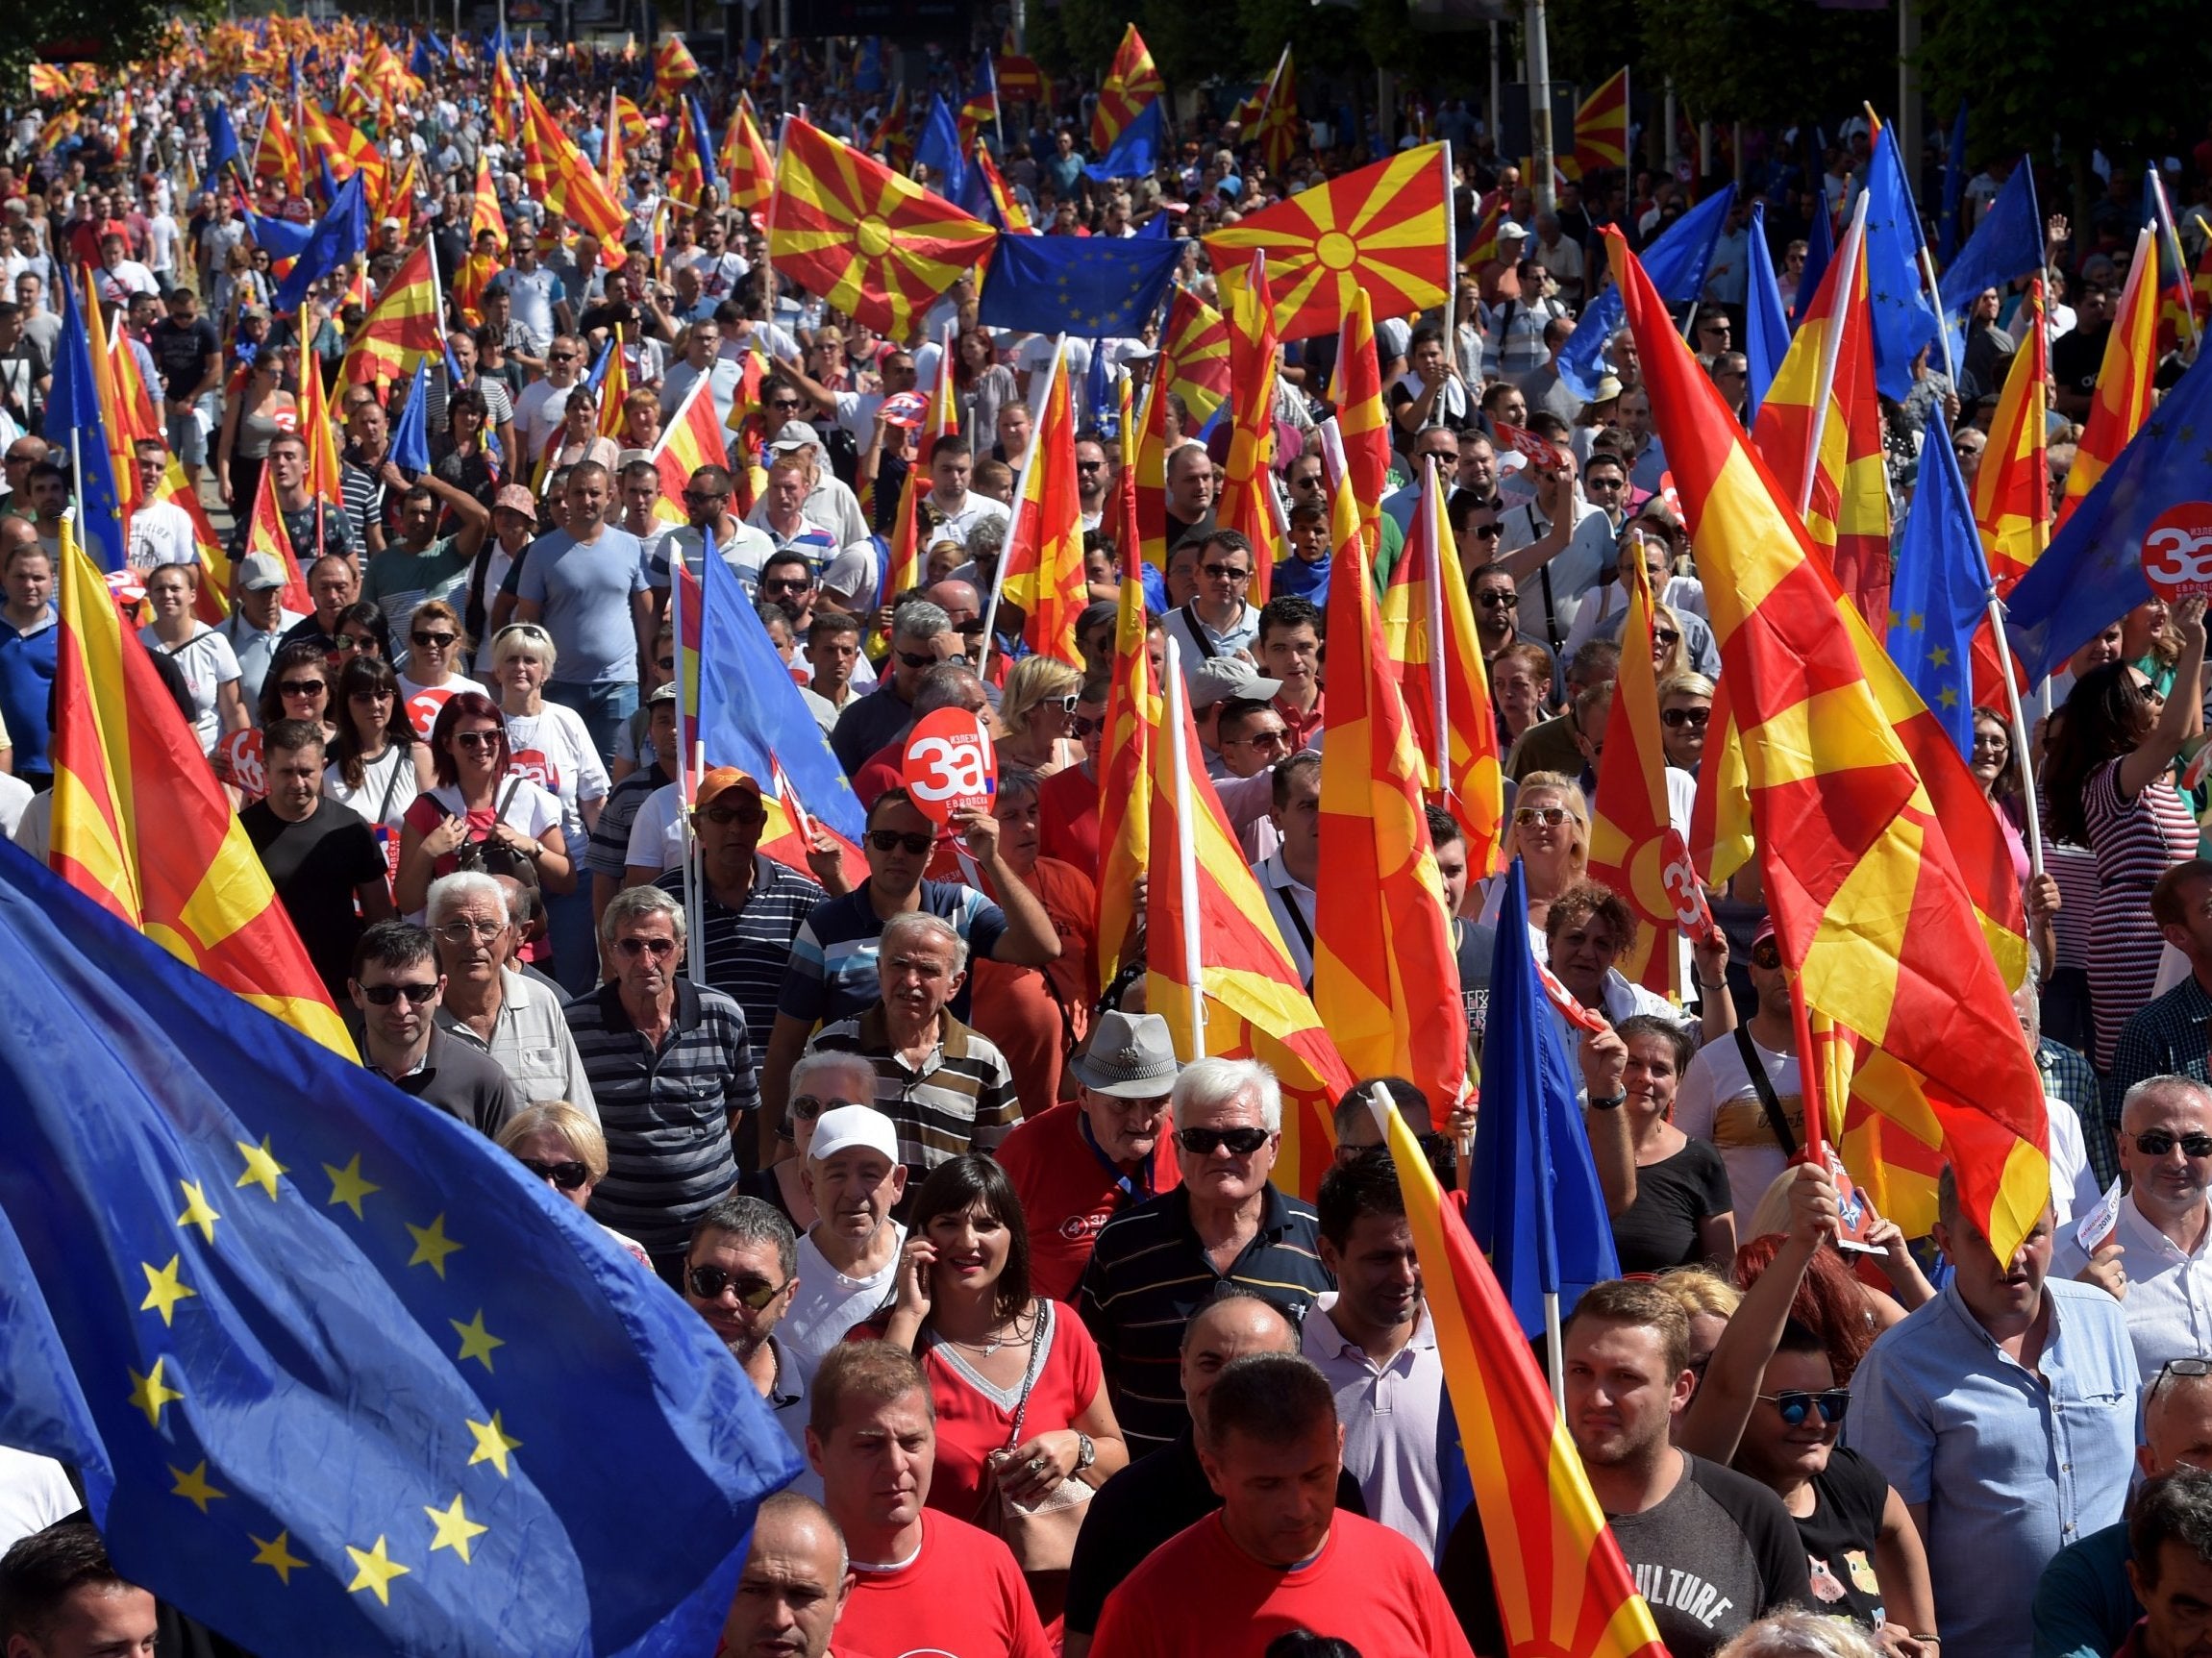 Several thousand Macedonians marched to express their support joining Nato and the European Union in Skopje (EPA/Nake Batev)